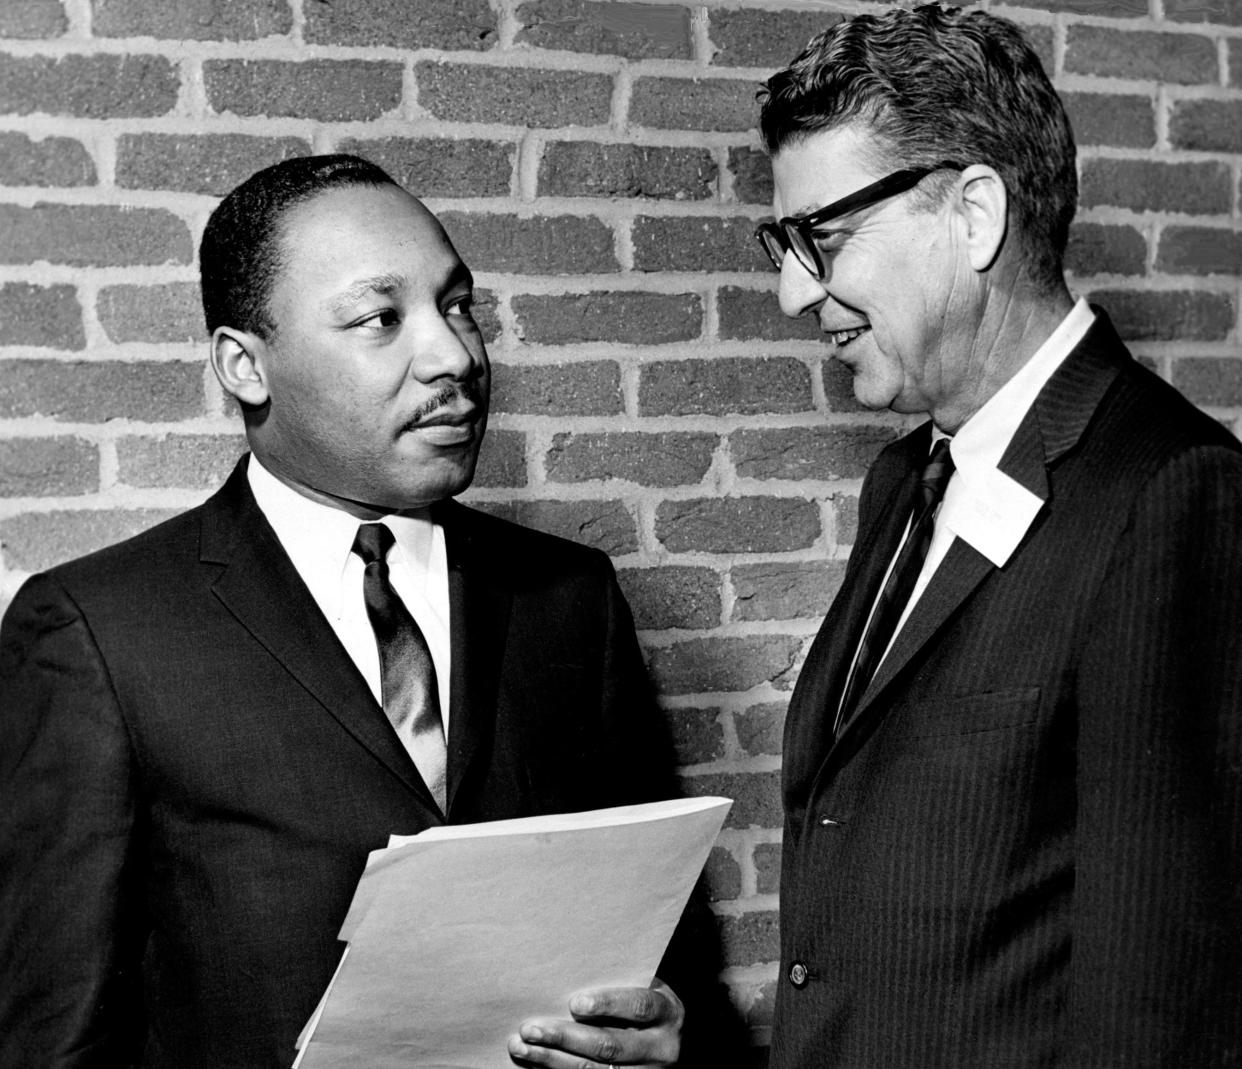 The Rev. Martin Luther King Jr., left, with an official, was the keynote speaker to officially opened a three-day conference on racial problems on Dec. 28, 1962. The session is being held in Underwood Auditorium on the University of Vanderbilt Law School campus and sponsored by the Fellowship of Southern Churchmen and the Southern Regional Council.